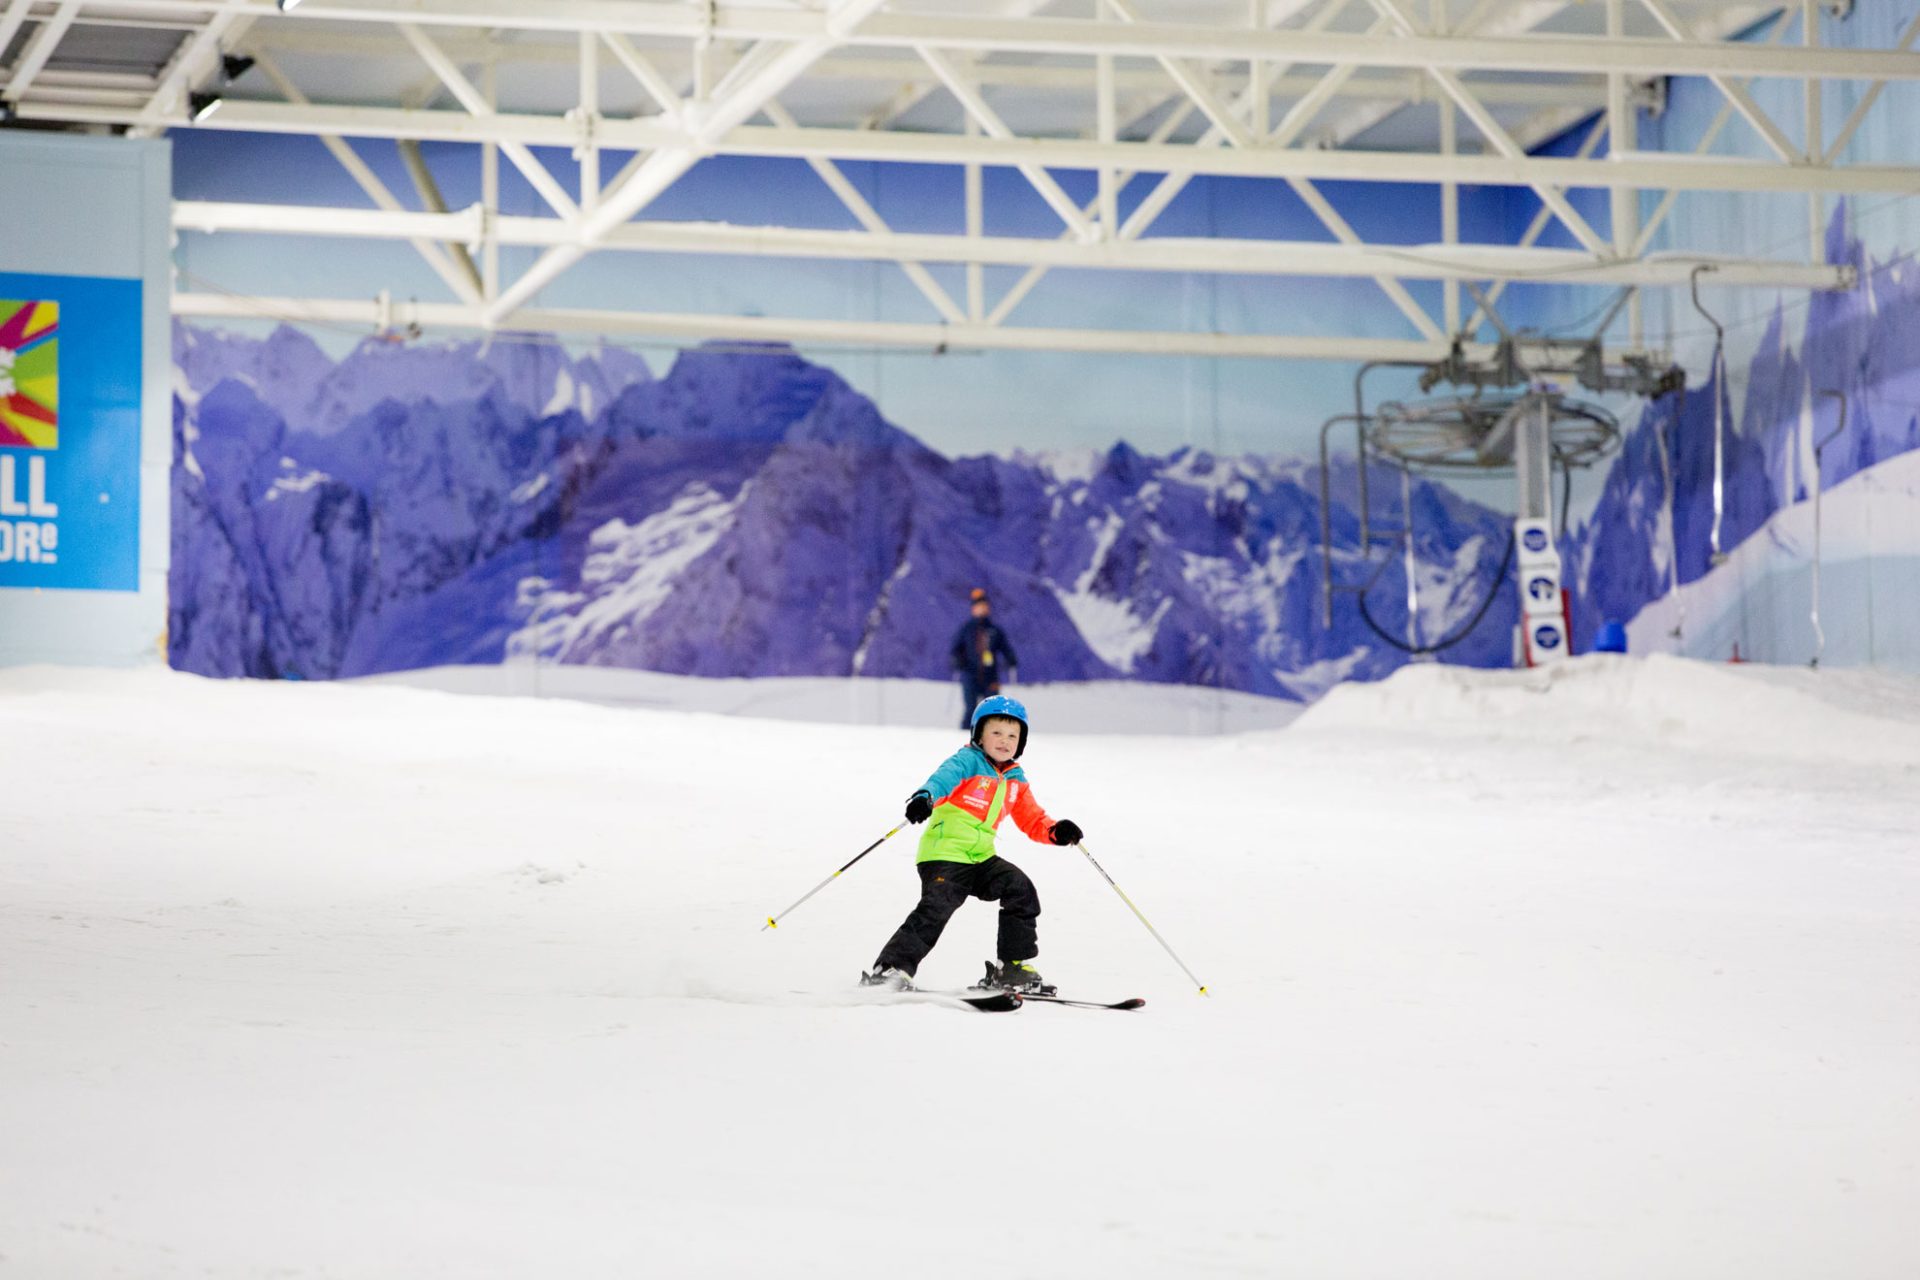 Last chance to join us at the Chill Factore!